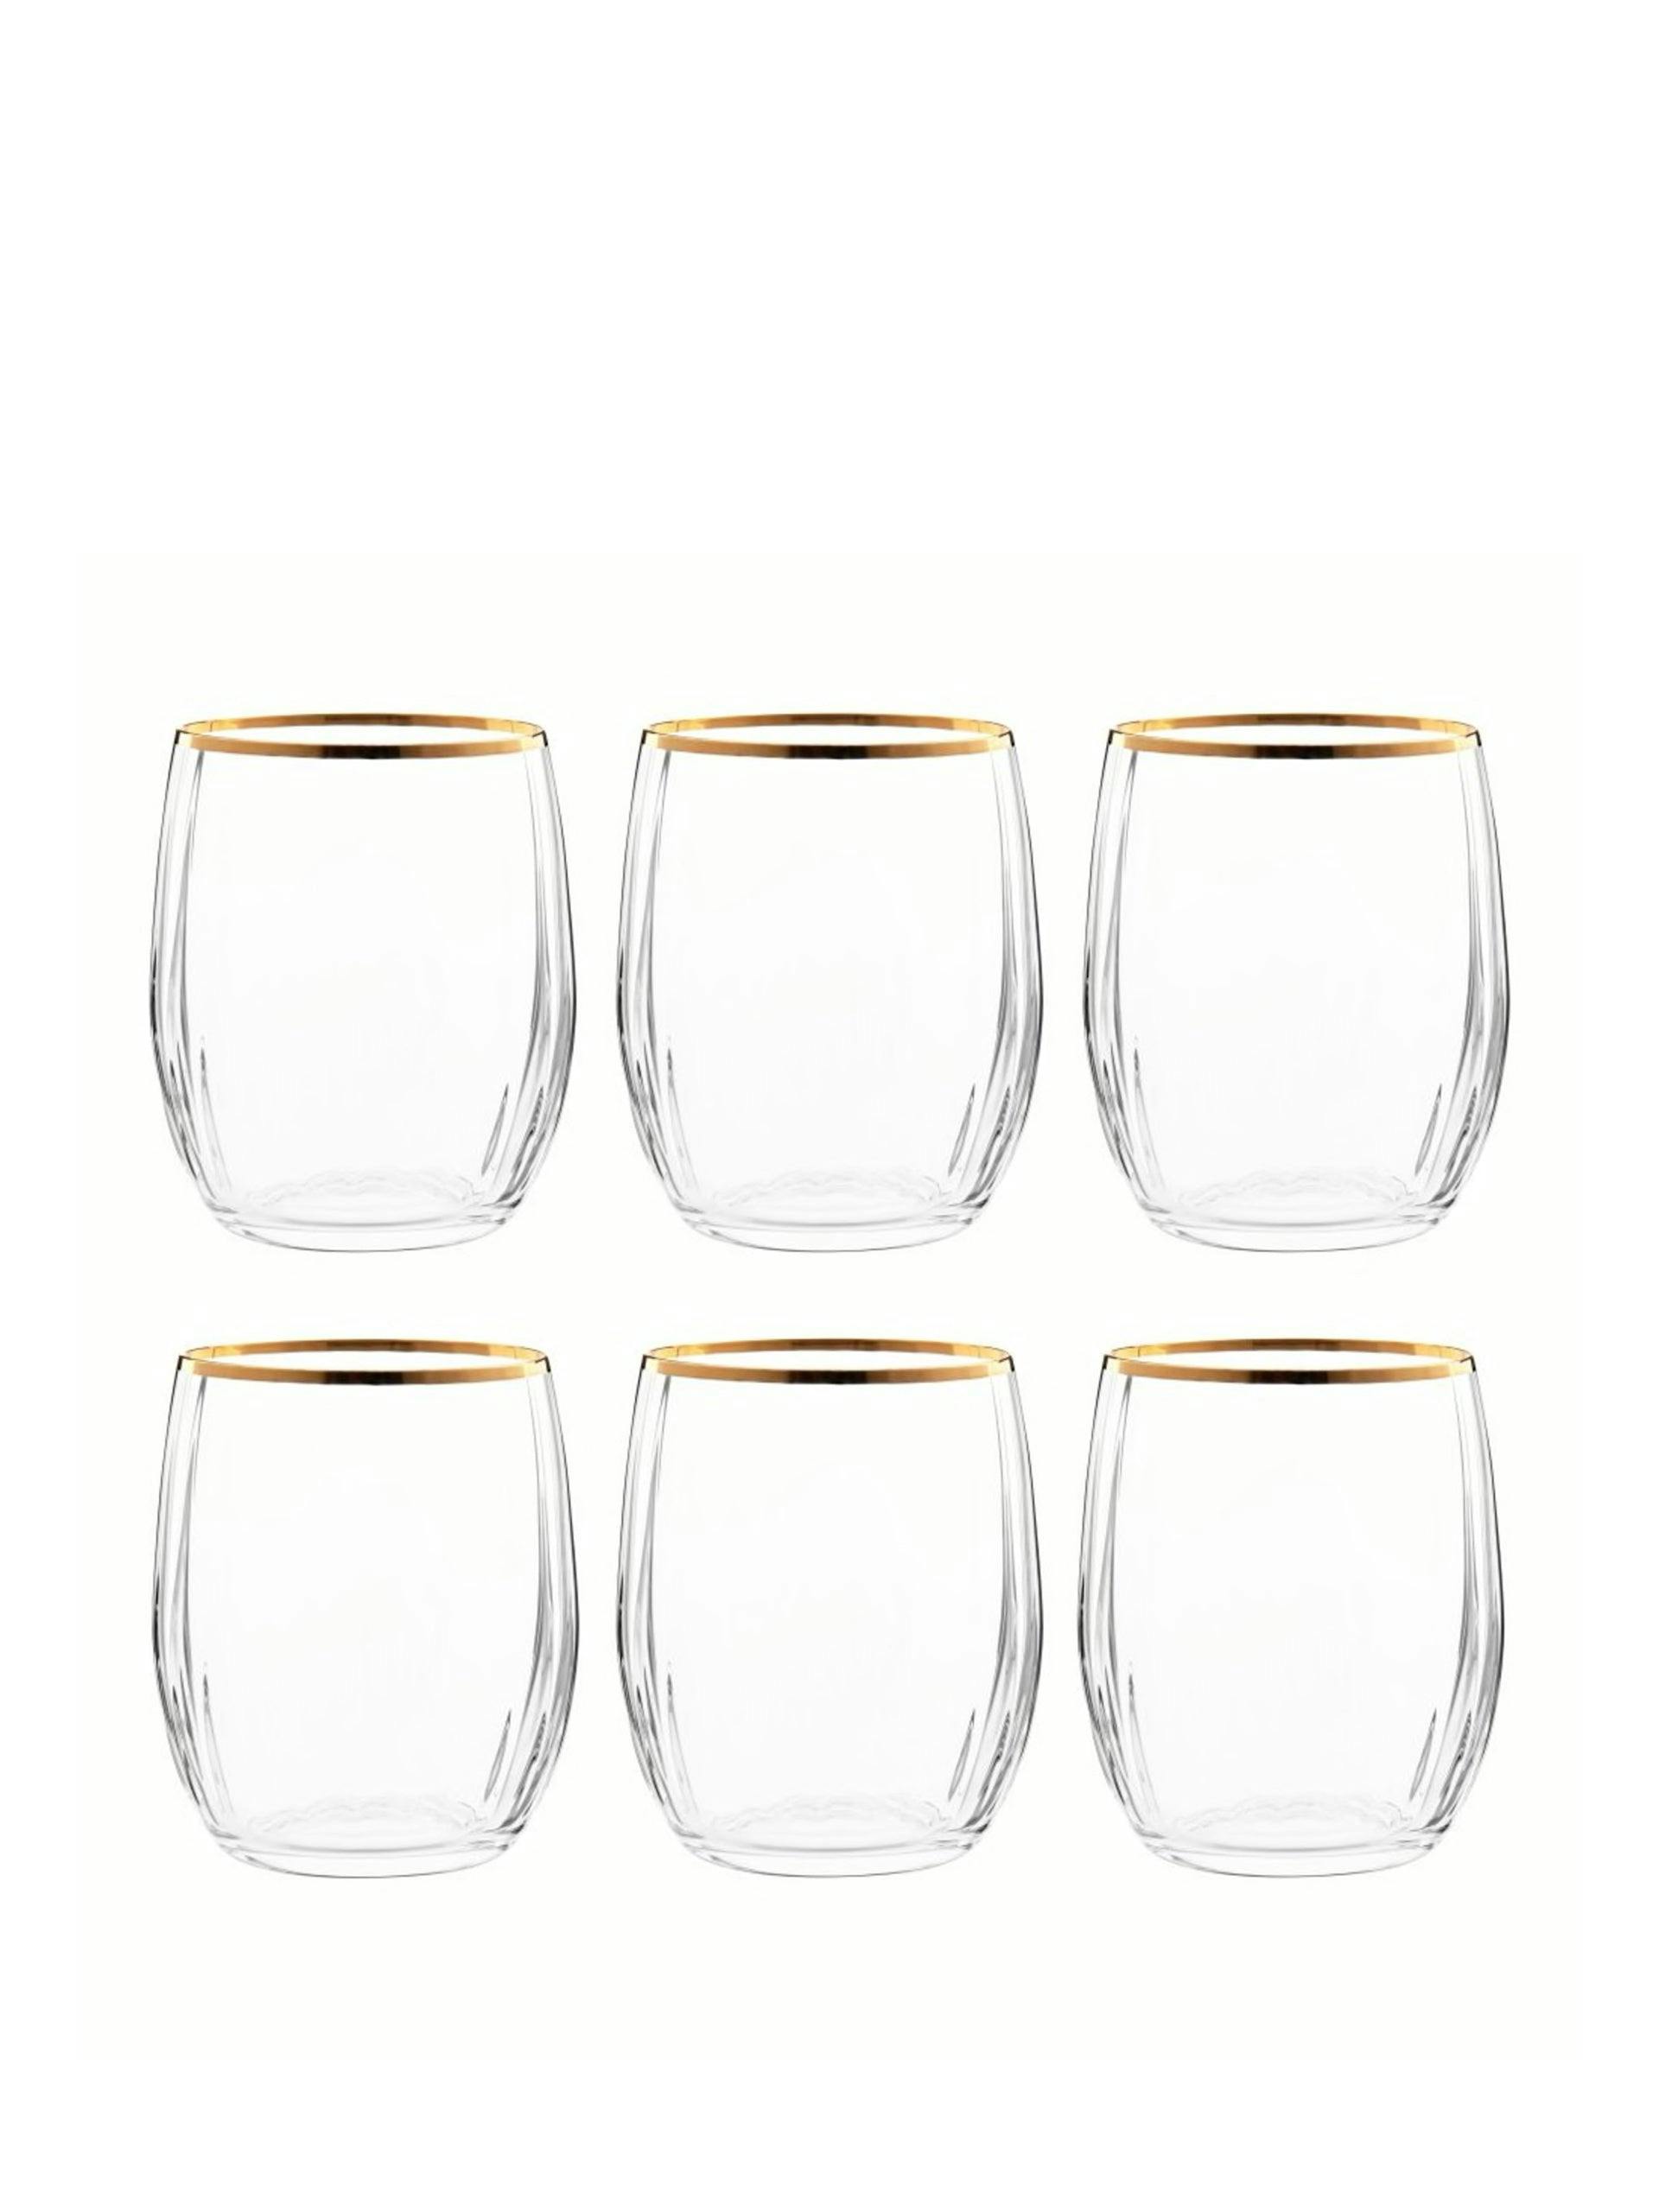 Glass tumblers with gold rim (set of 6)